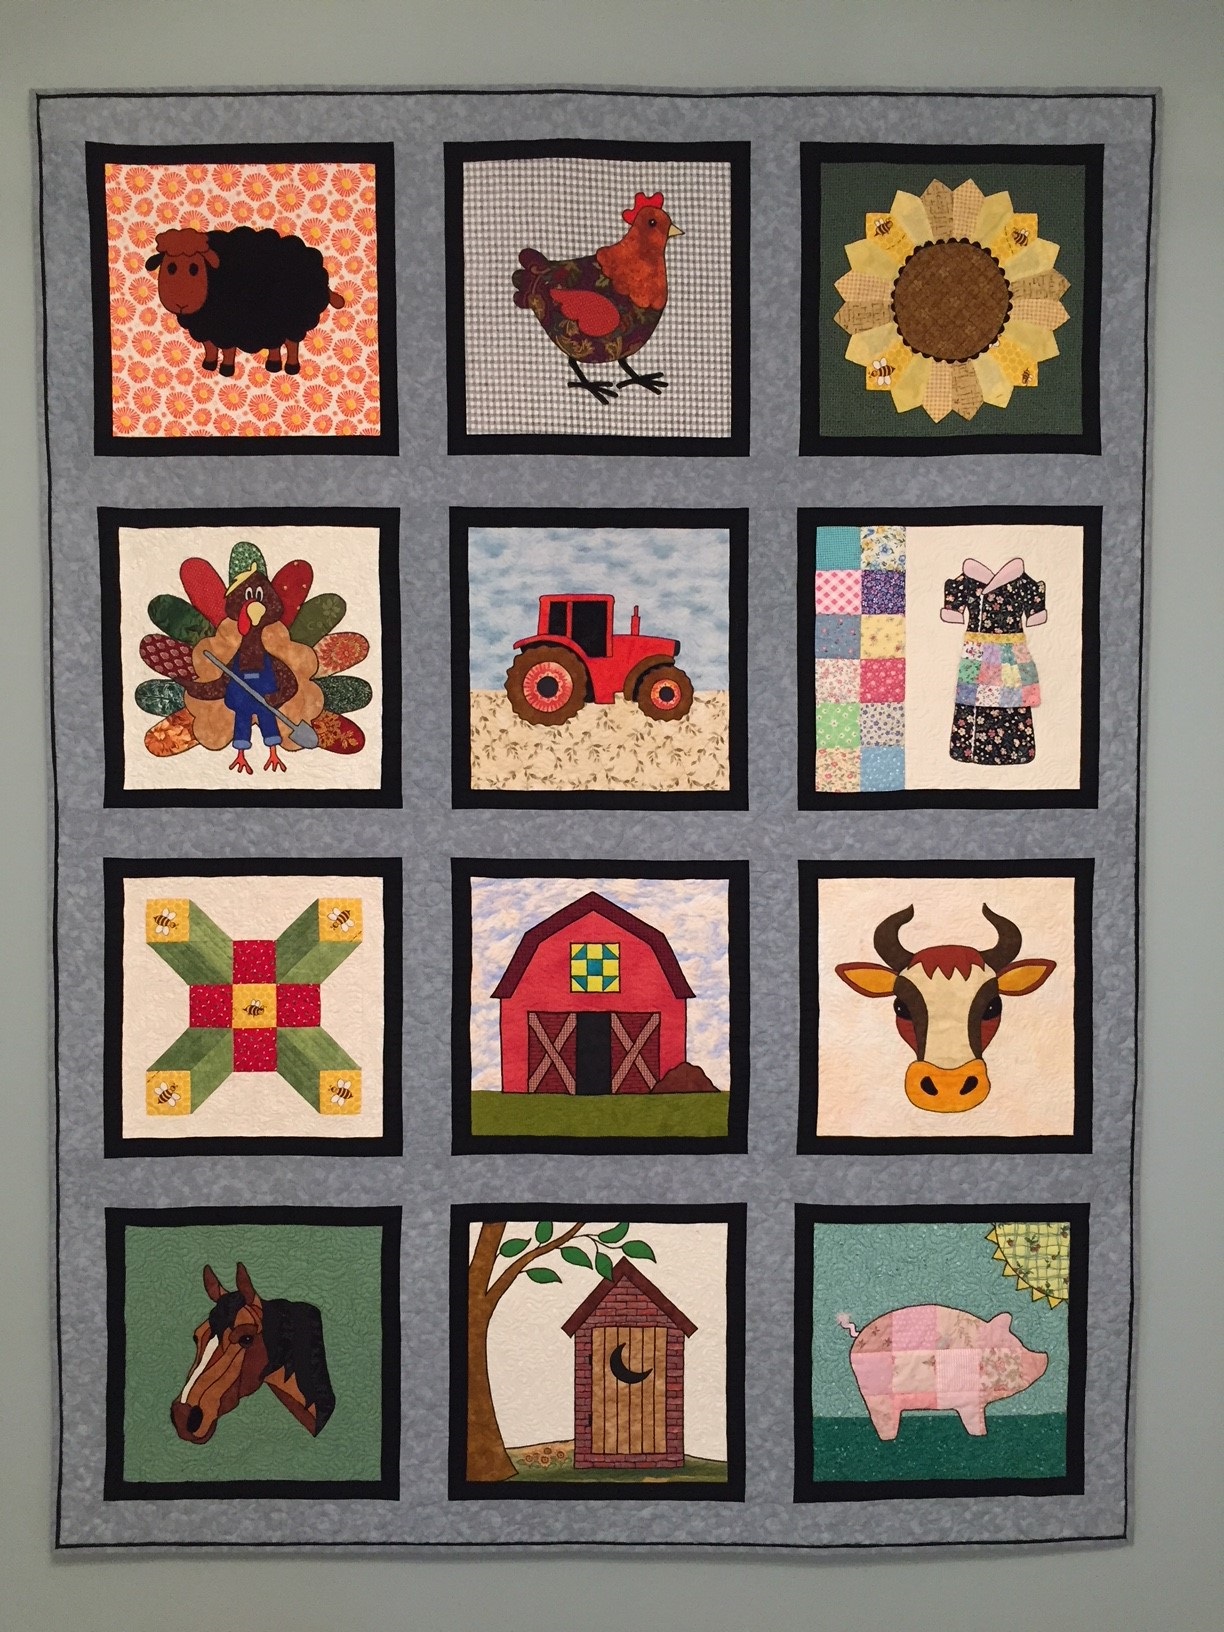 Fun on the Farm BOM from Quilt in a Day - Quiltingboard Forums